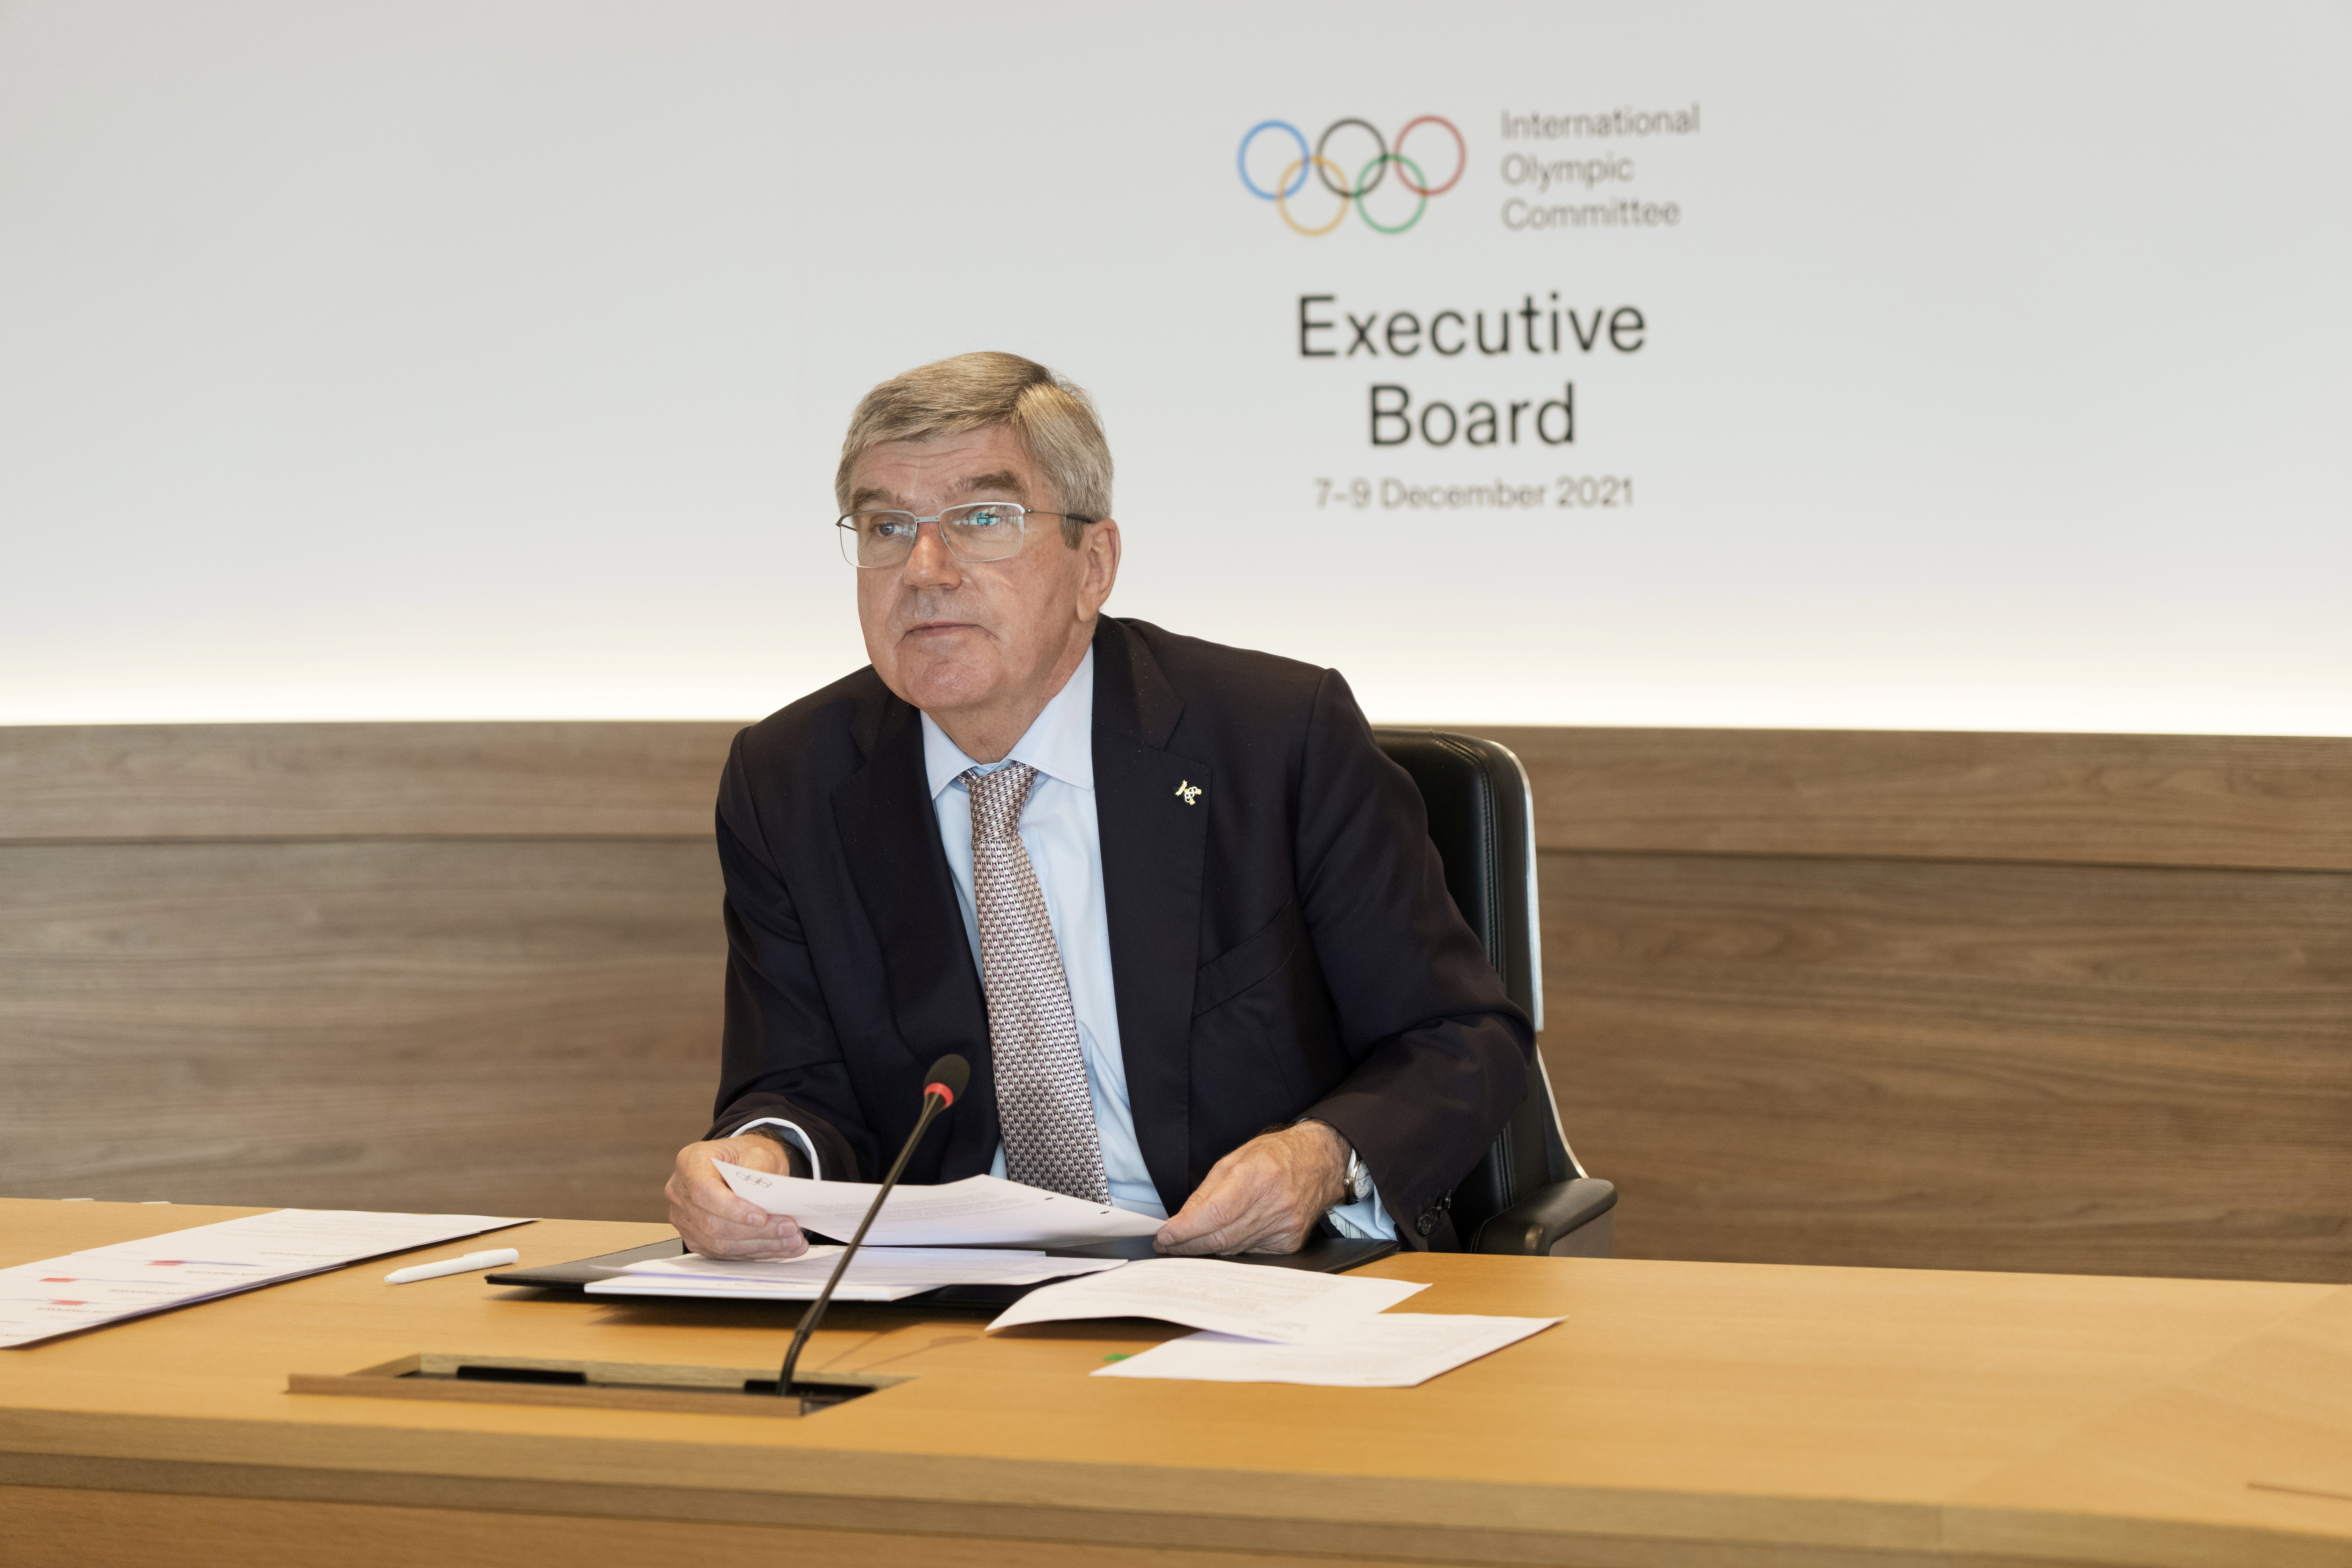 BEHIND THE SCENES: From the Roman Empire to the fake Peng Shuai: in the midst of the storm, Thomas Bach takes the helm of the Olympic ship with force